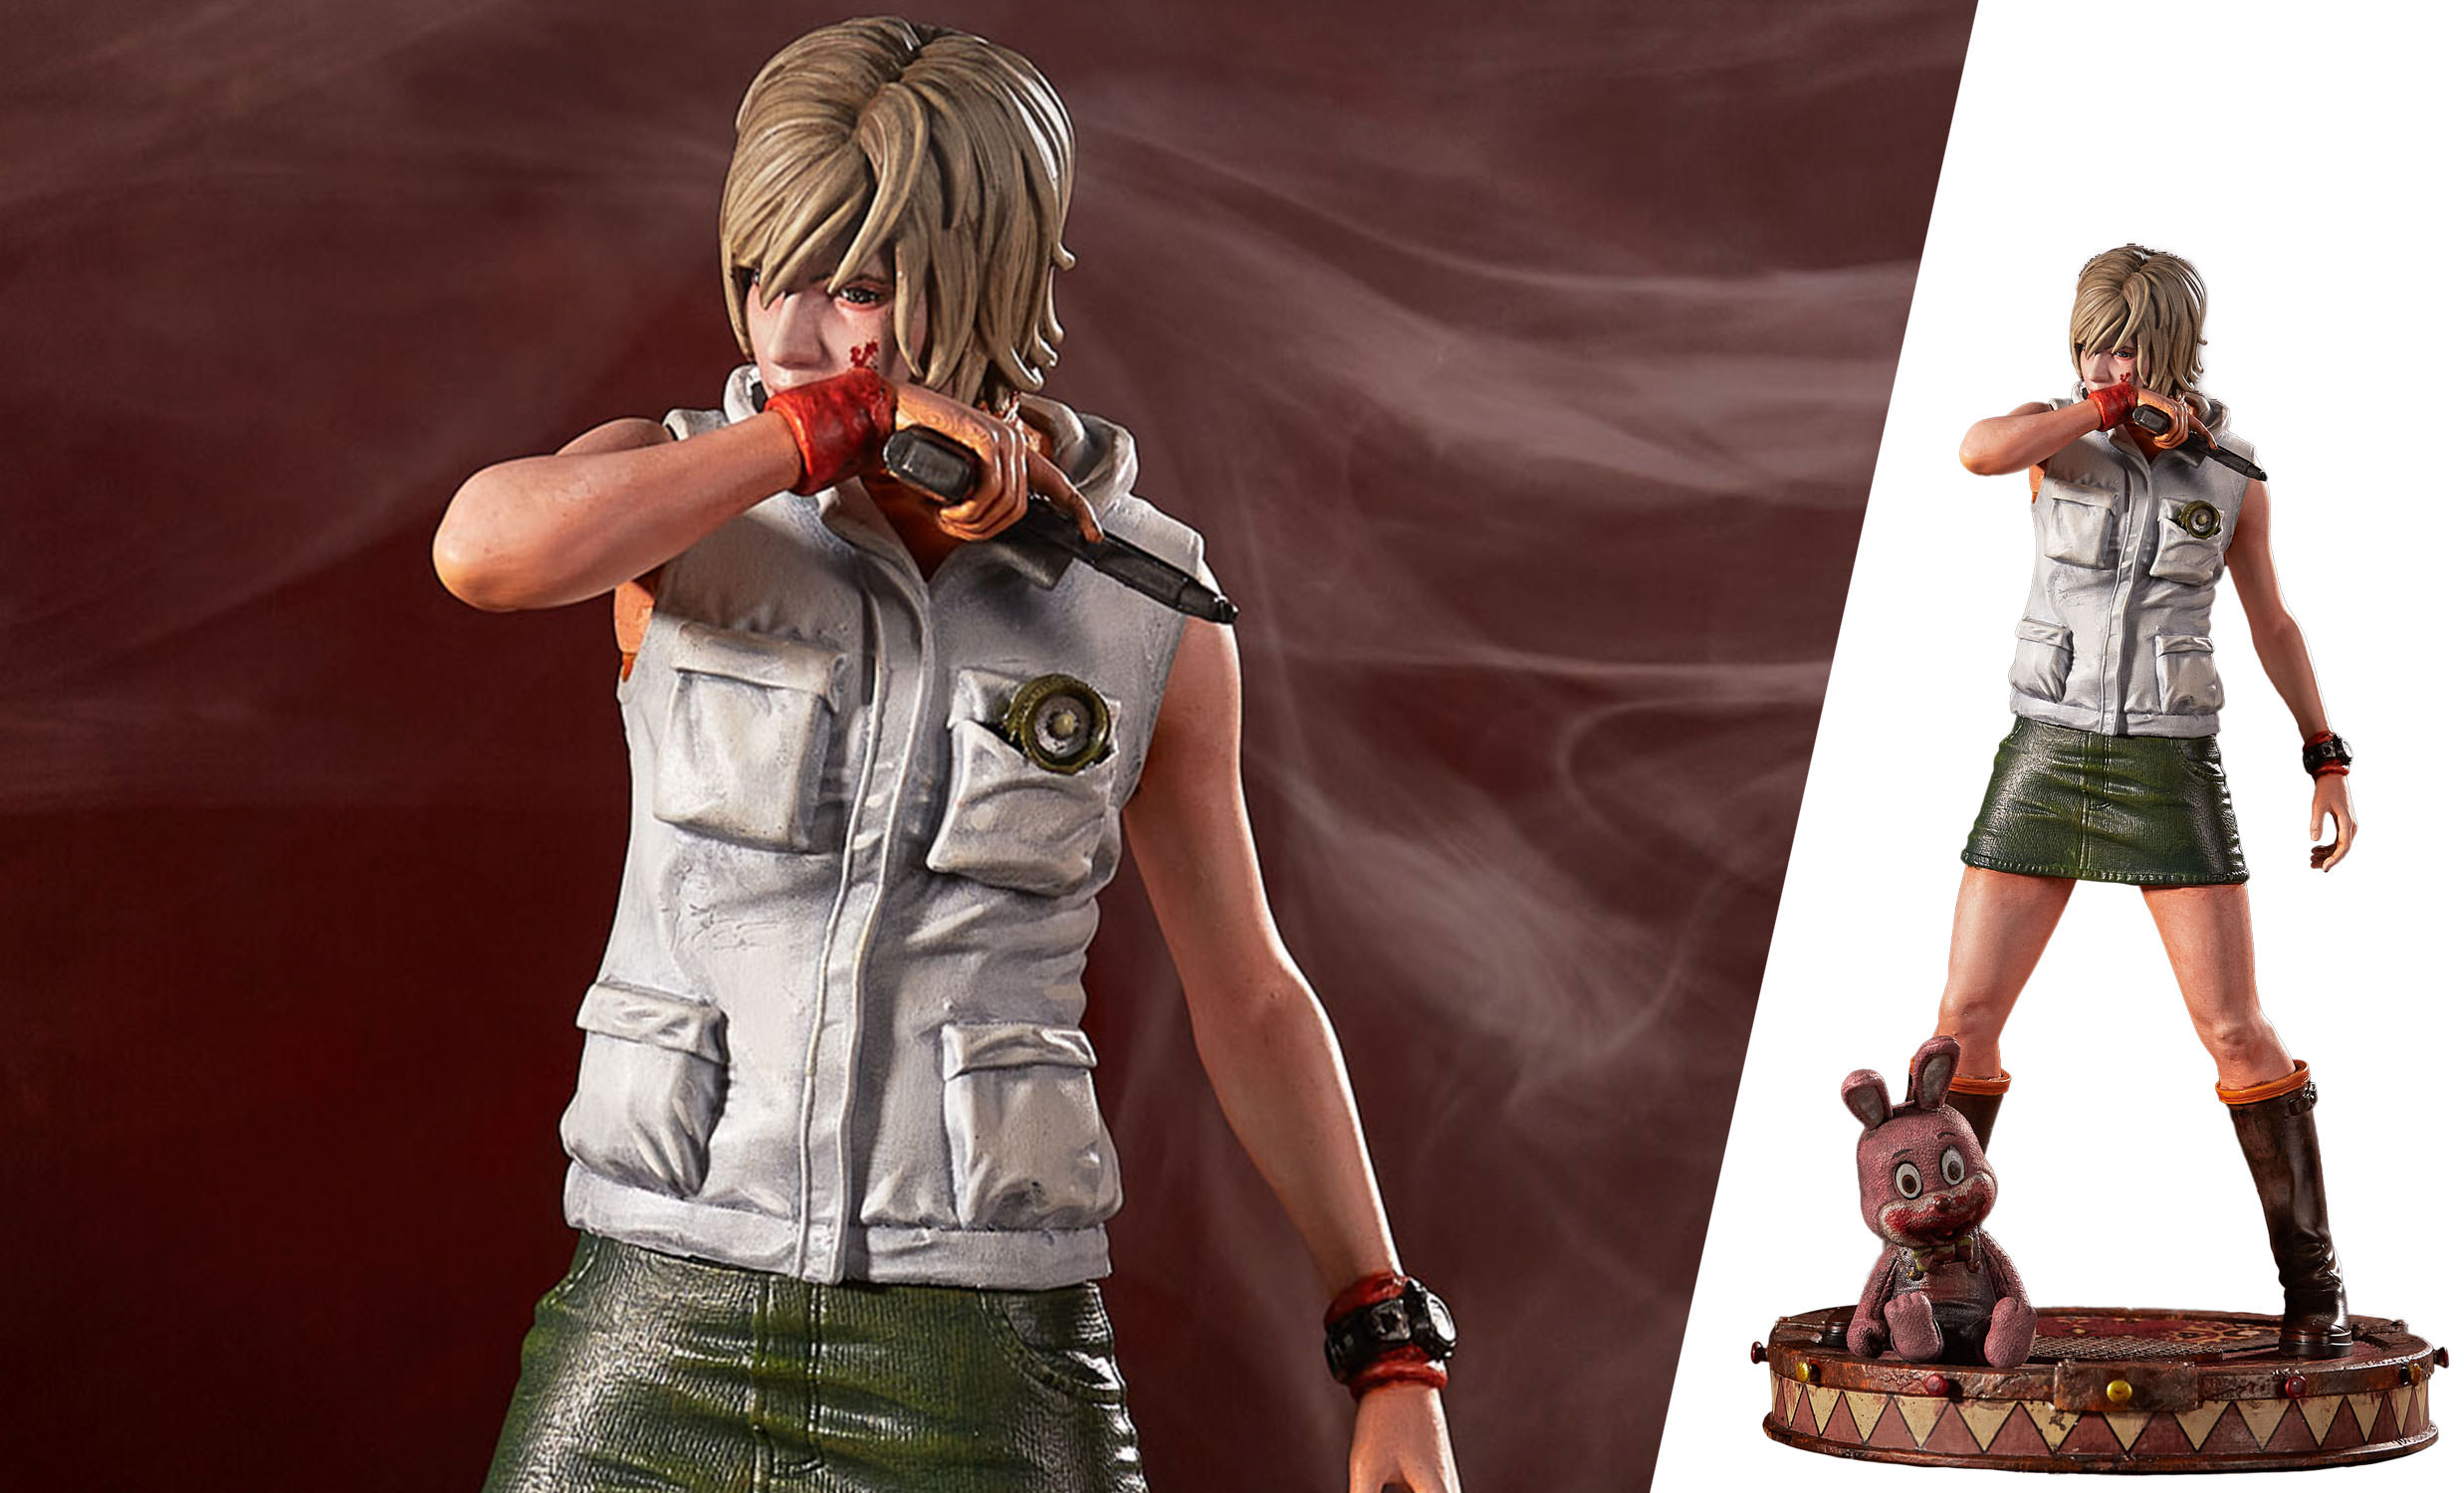 Official Silent Hill 3 Heather Mason Limited Edition Statue – Just